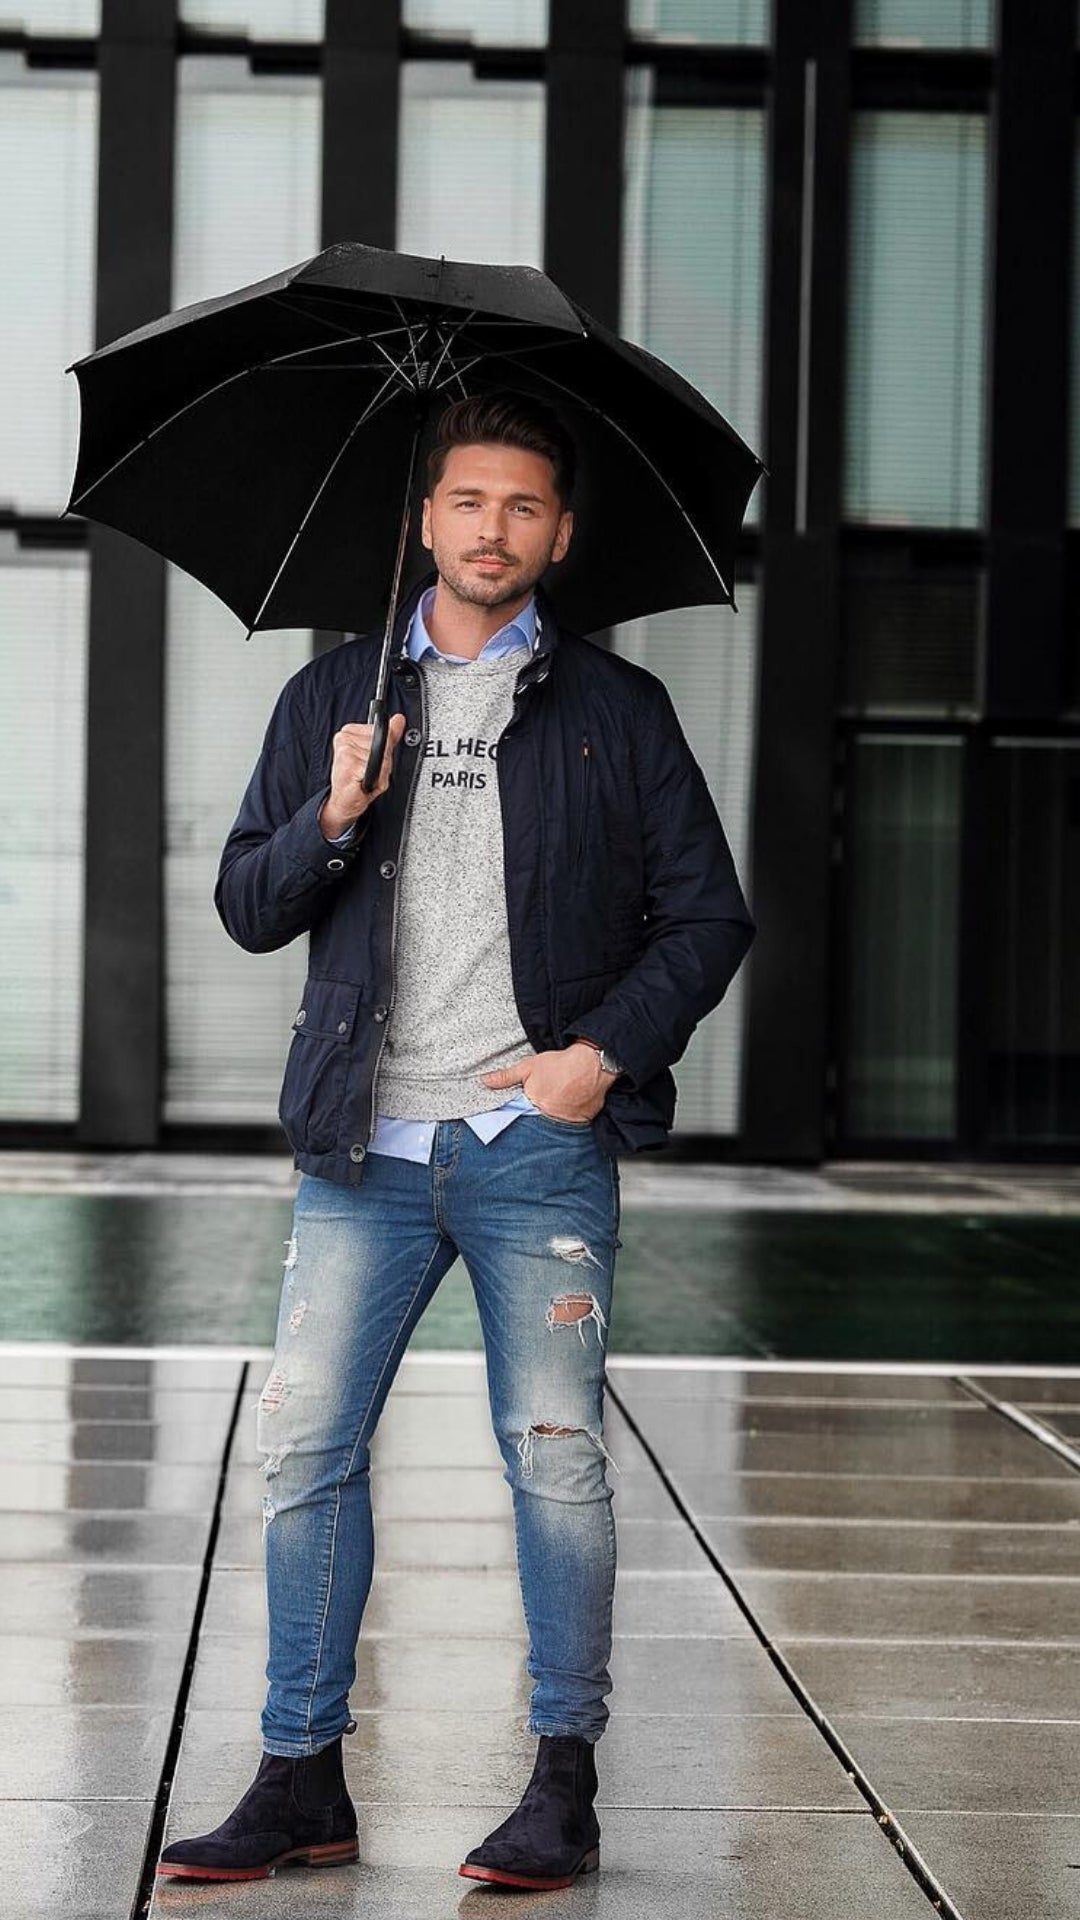 Looking for cool fall street style ideas? These 5 amazing fall street style looks will make you look sharp. #fallstyle #fallfashion #mens #fashion #street #style #fashiontips